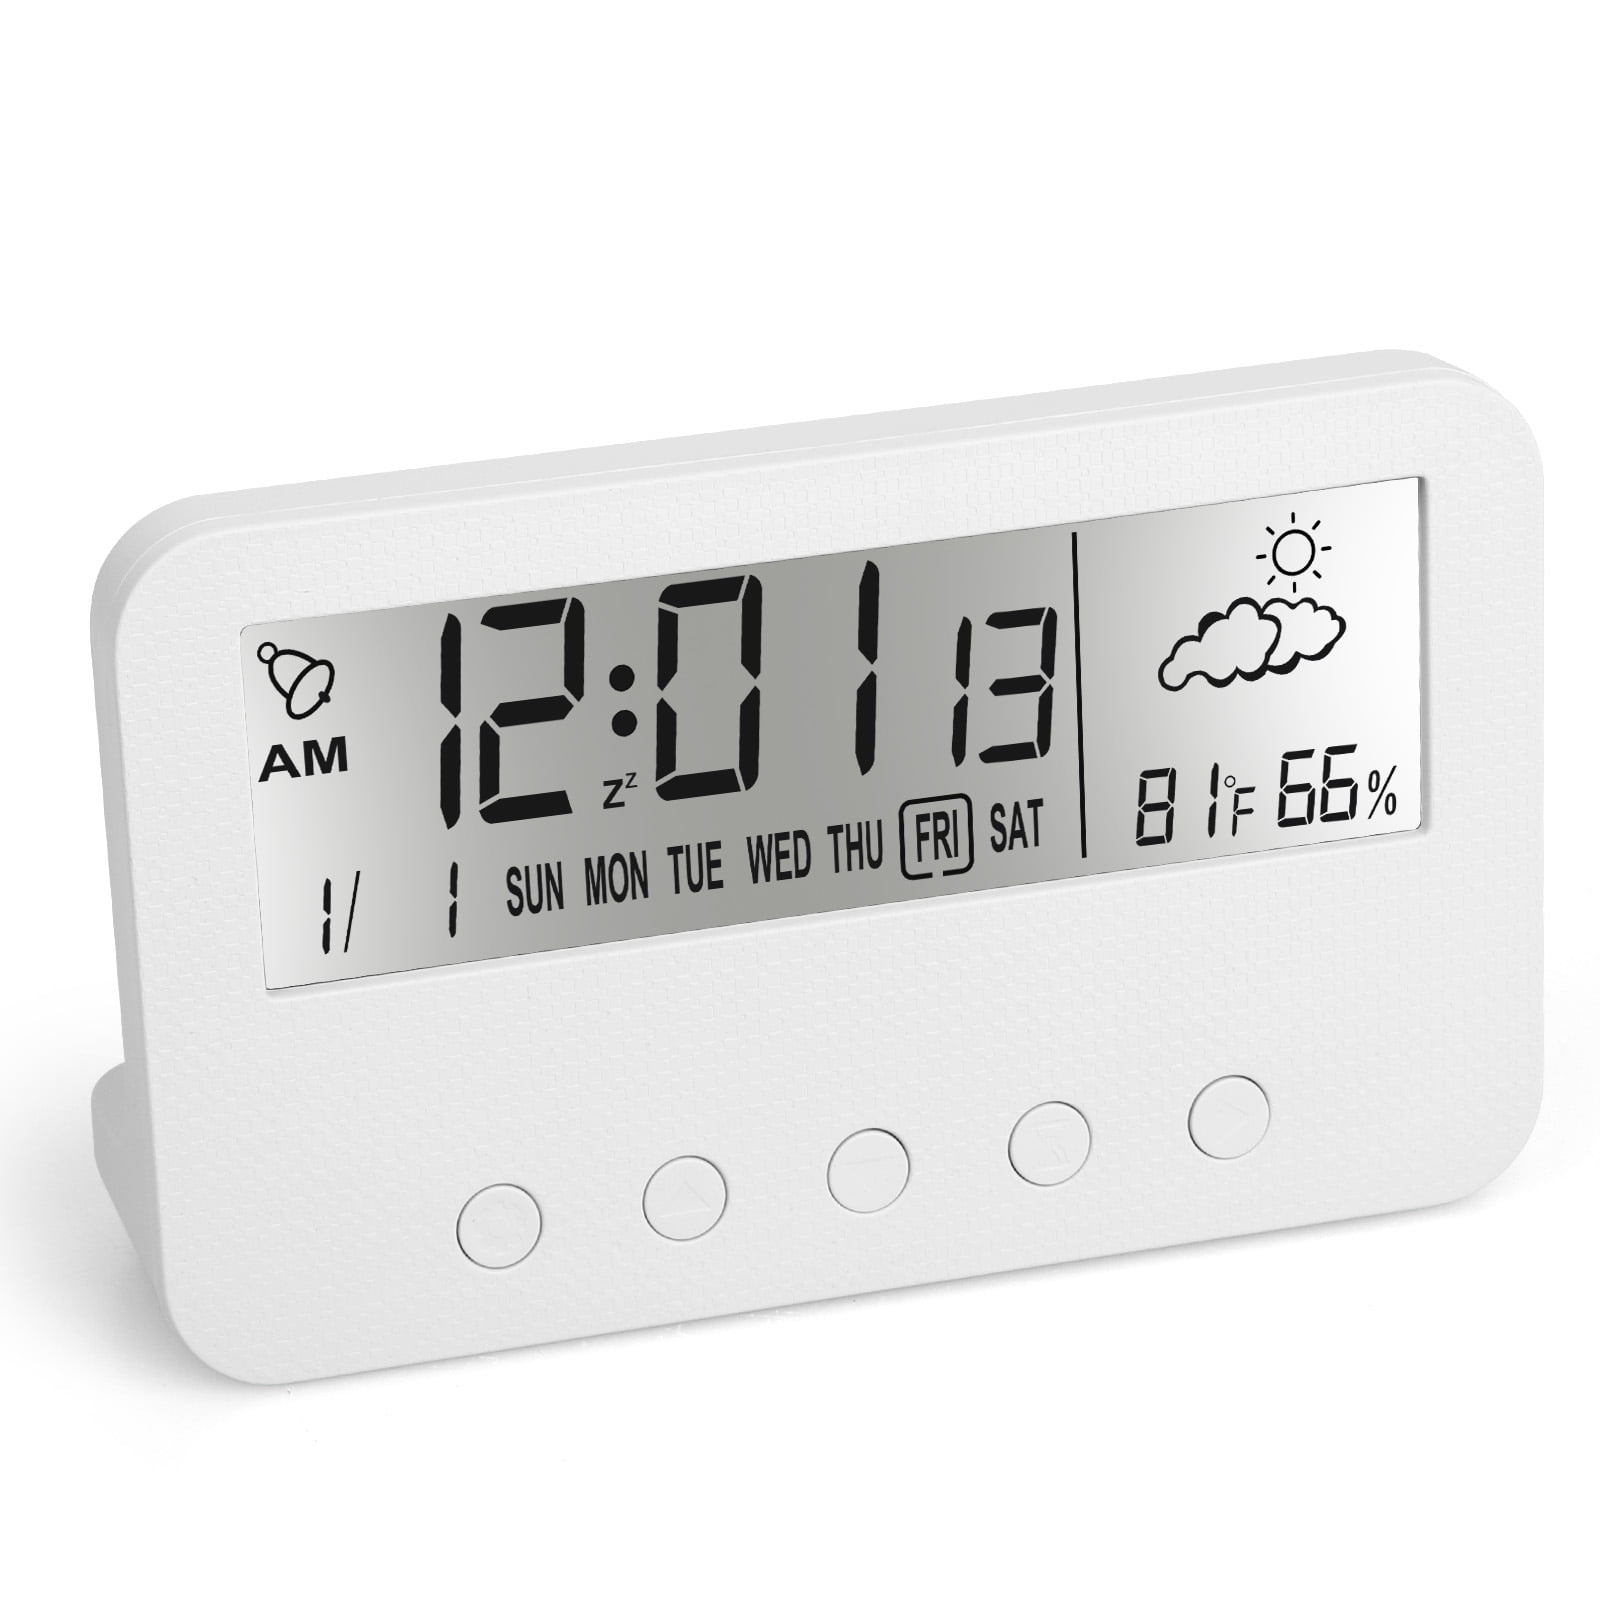 Coca-Cola Radio Alarm Clock Things type Battery powered NEW Japan collection 